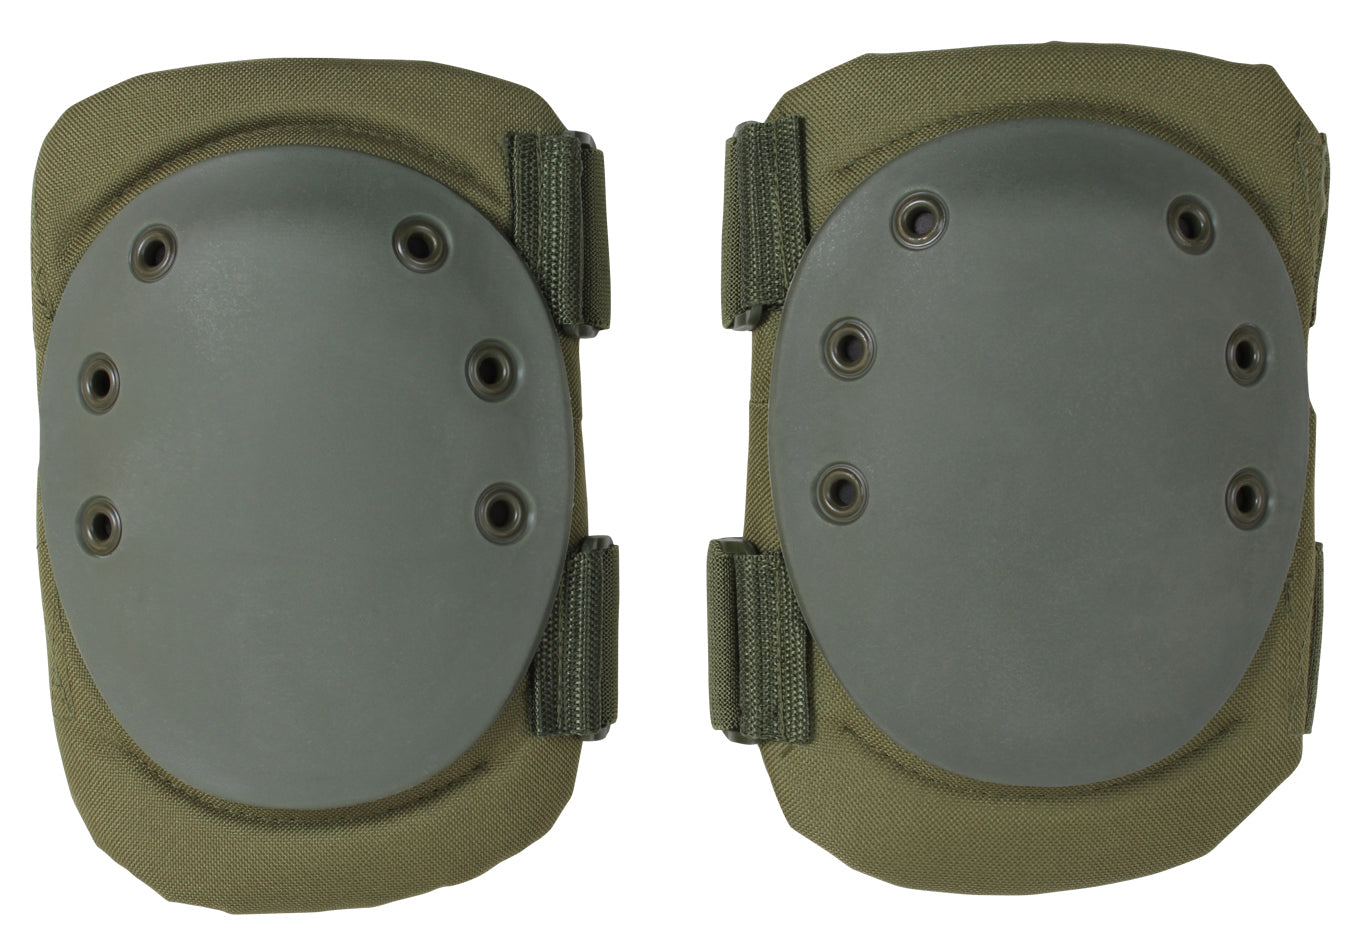 Rothco Tactical SWAT Protective Knee Pads - Solid Camo Colors